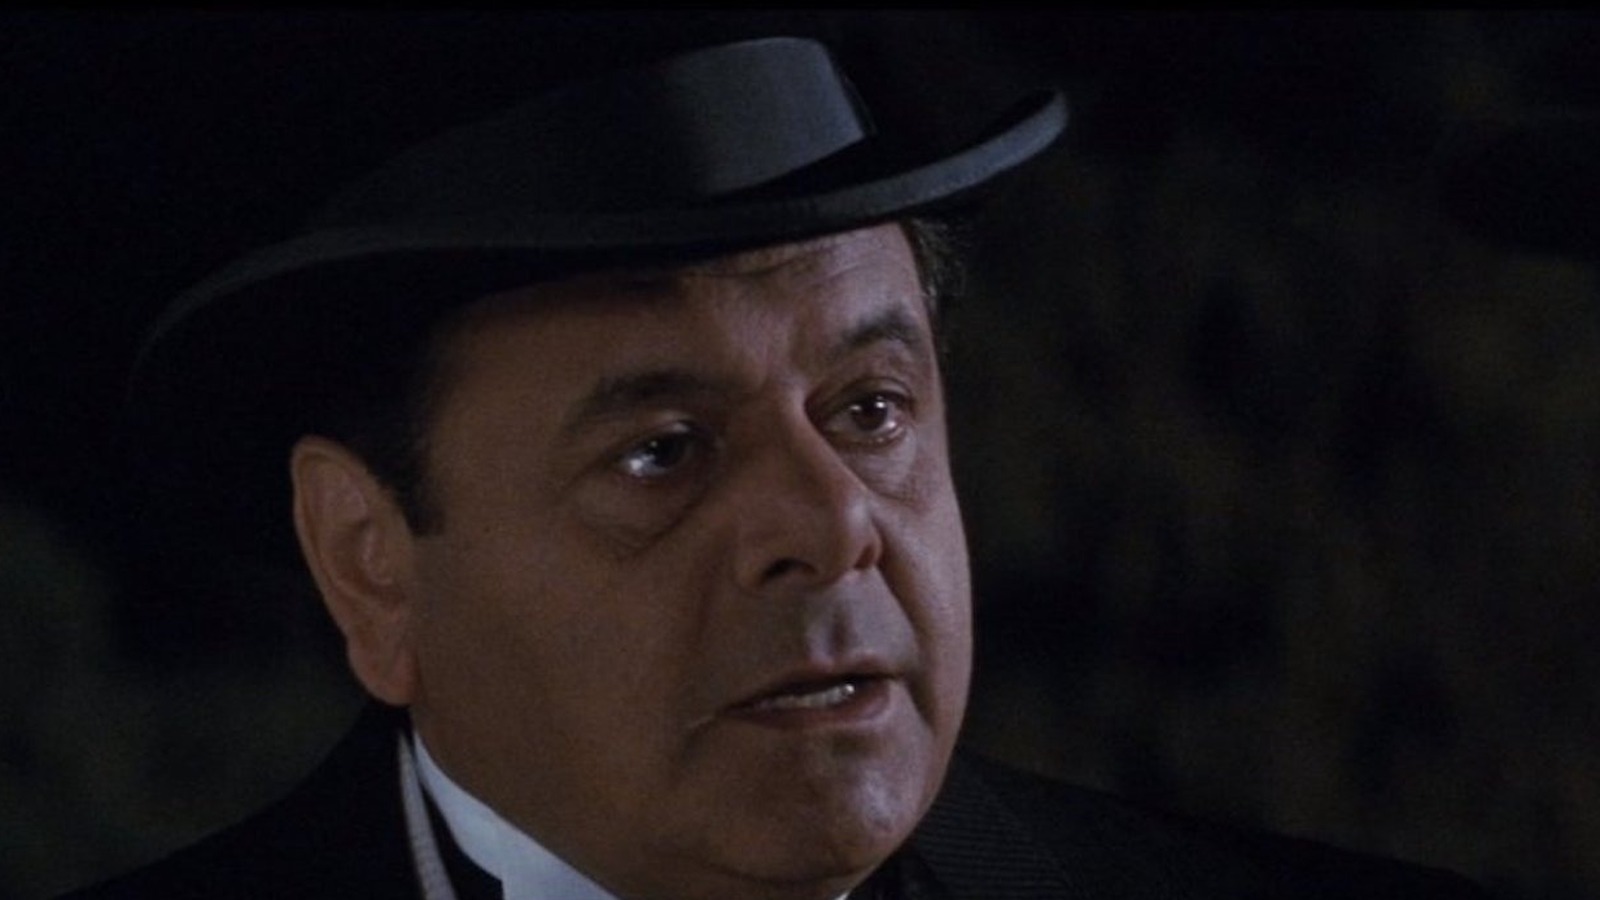 #Paul Sorvino’s Key The Rocketeer Scene Is One Of The Great Movie Moments Of All Time